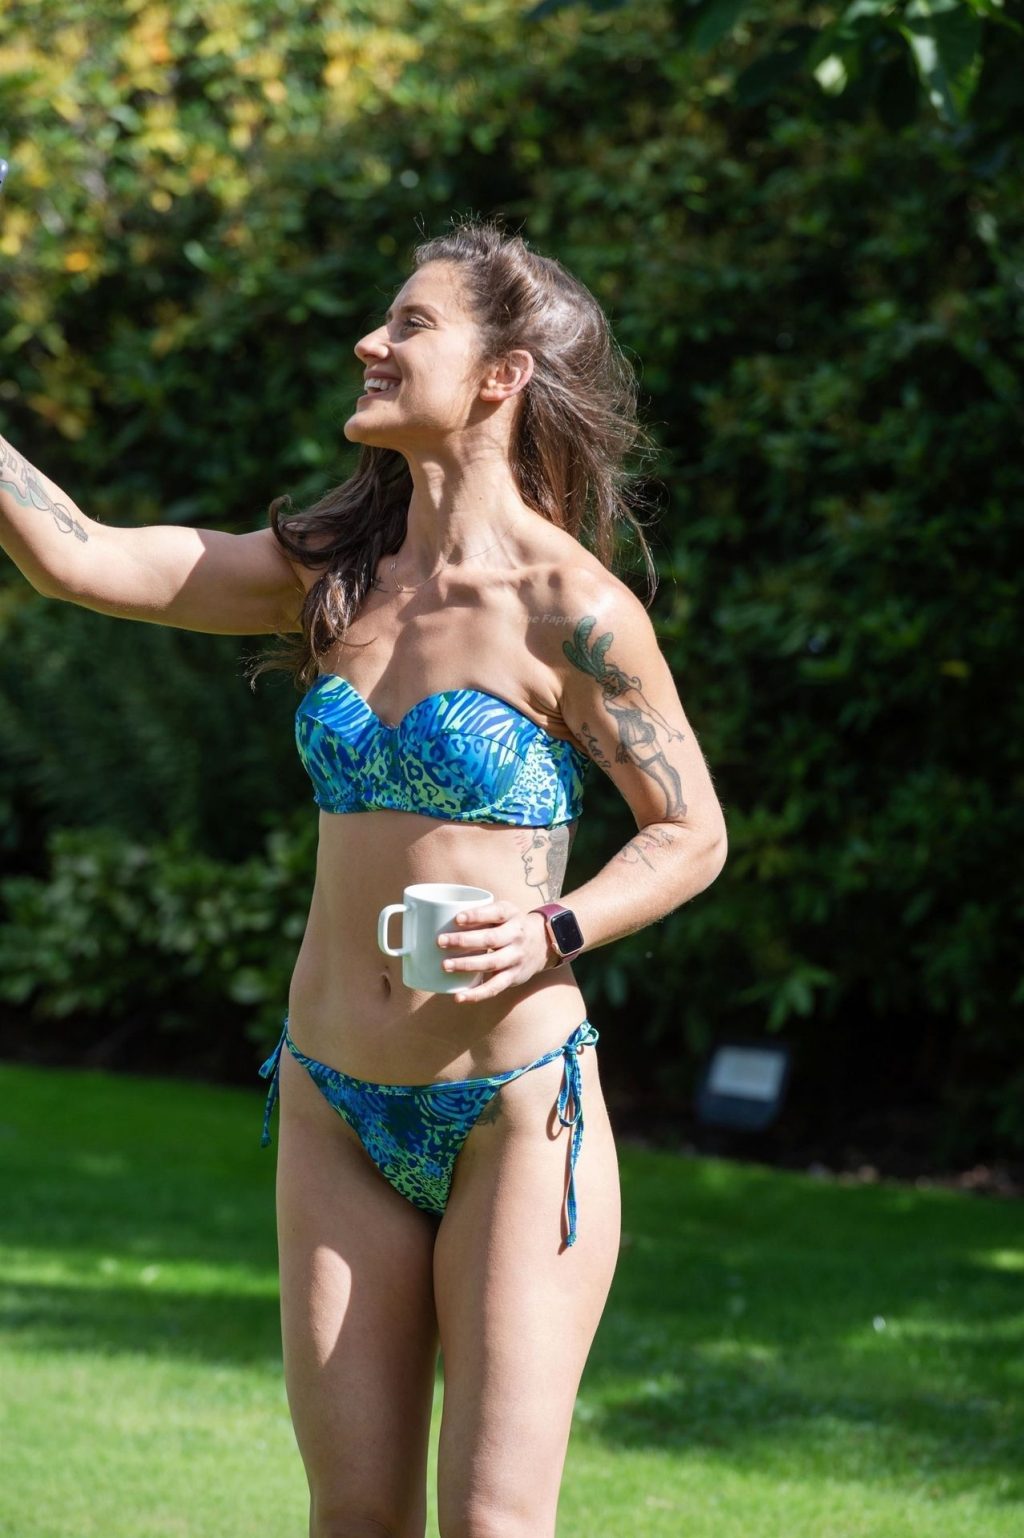 Katie Waissel is Seen on a Photoshoot in London For Her Fitness Website The Shed (9 Photos)